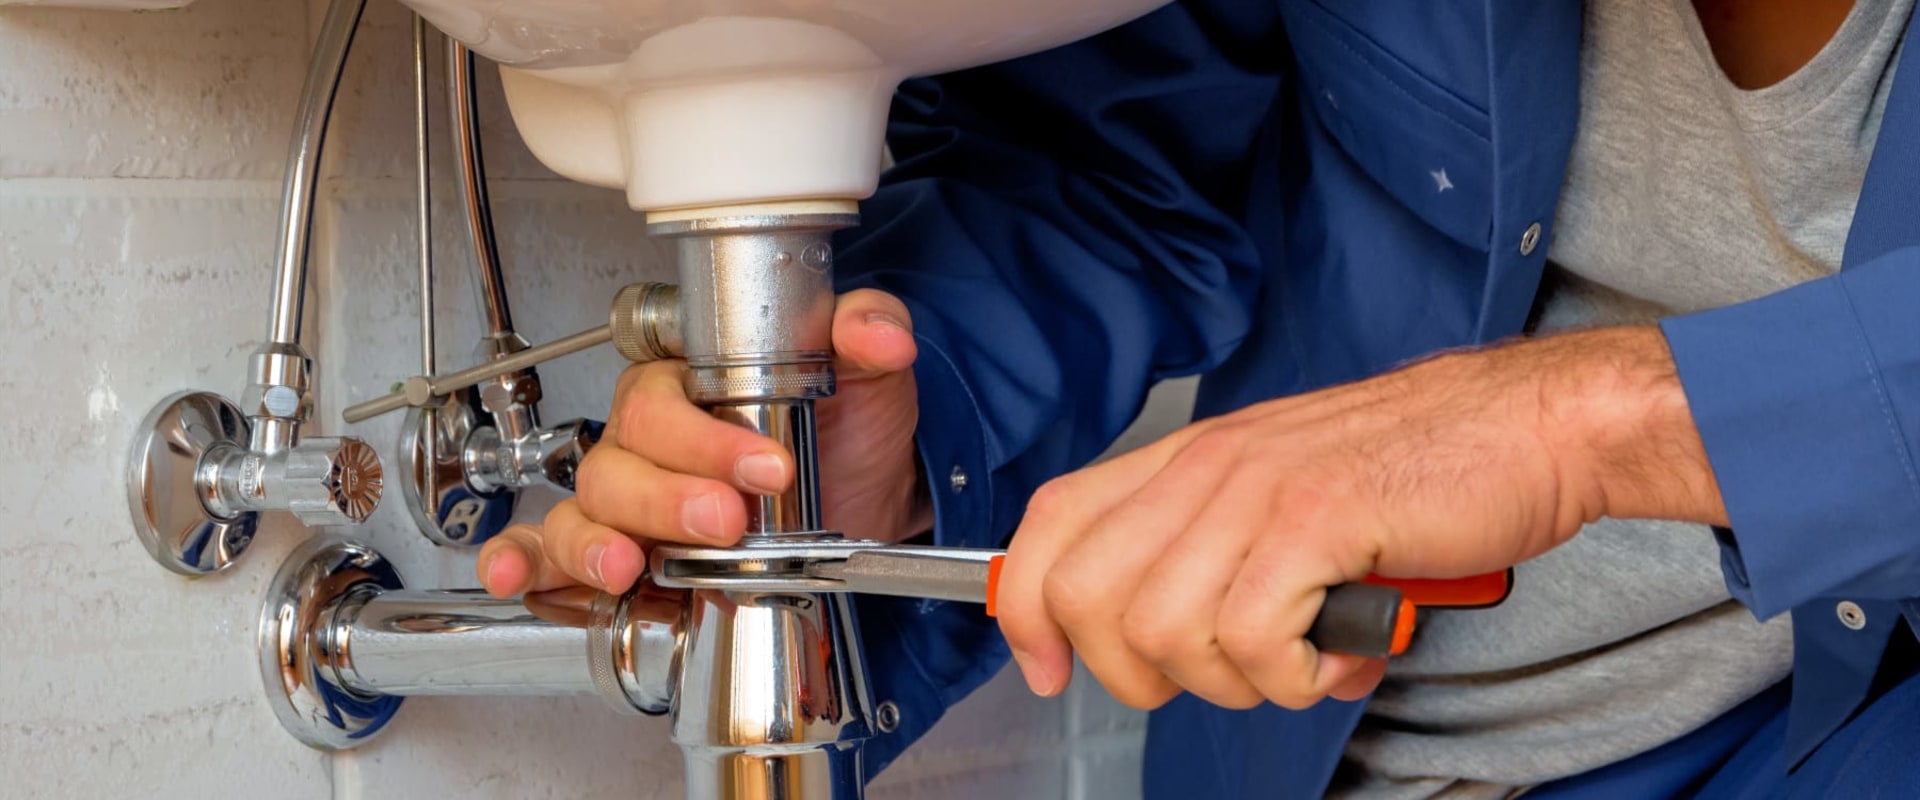 Comparing Plumber Prices: Finding an Affordable Option